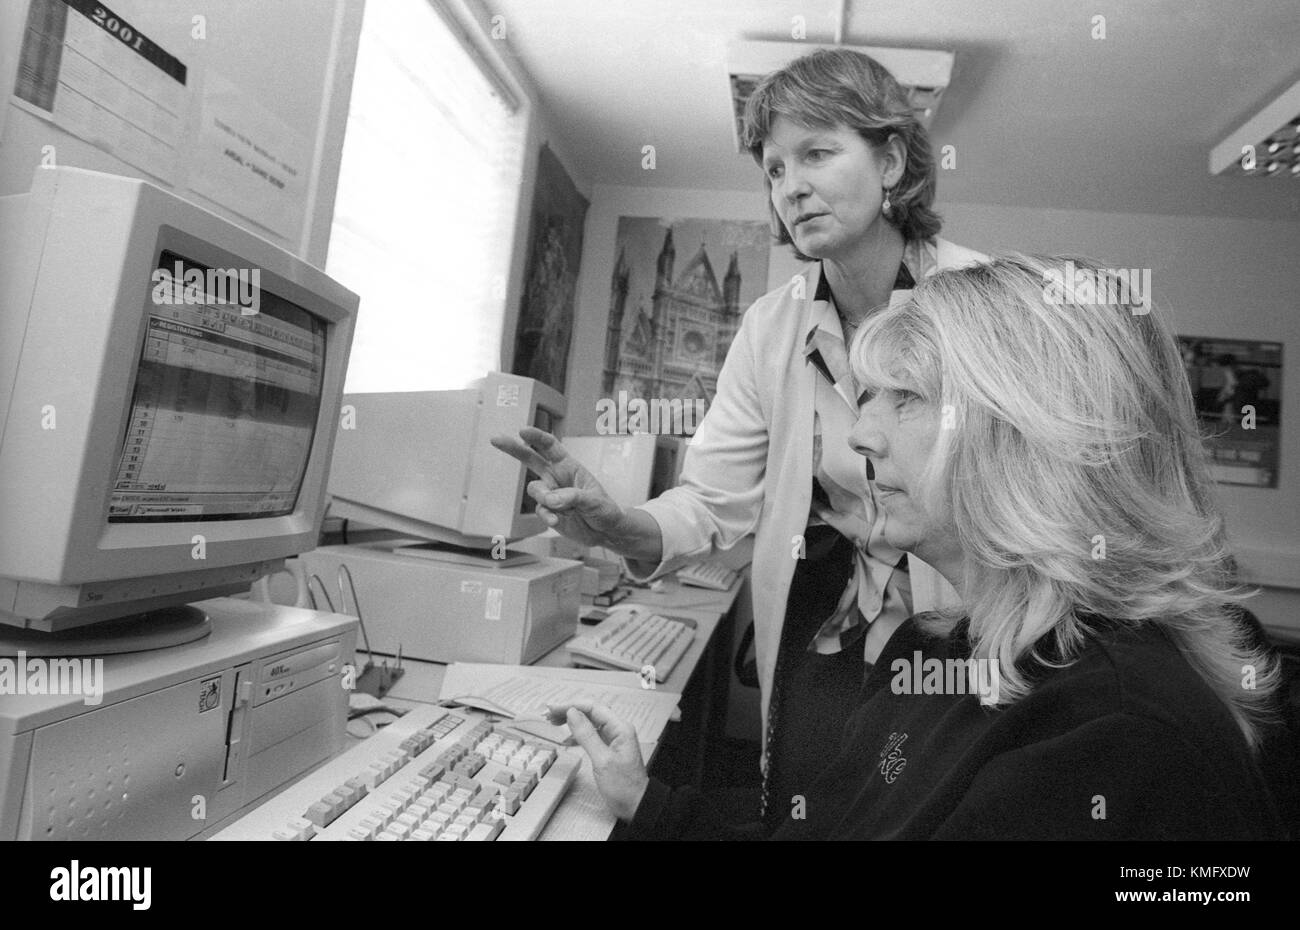 Female inmate learning computer skills in education room assisted by prison tutor (standing) at HMP Winchester prison, Winchester, Hampshire, United Kingdom. 10 May 2001. Stock Photo